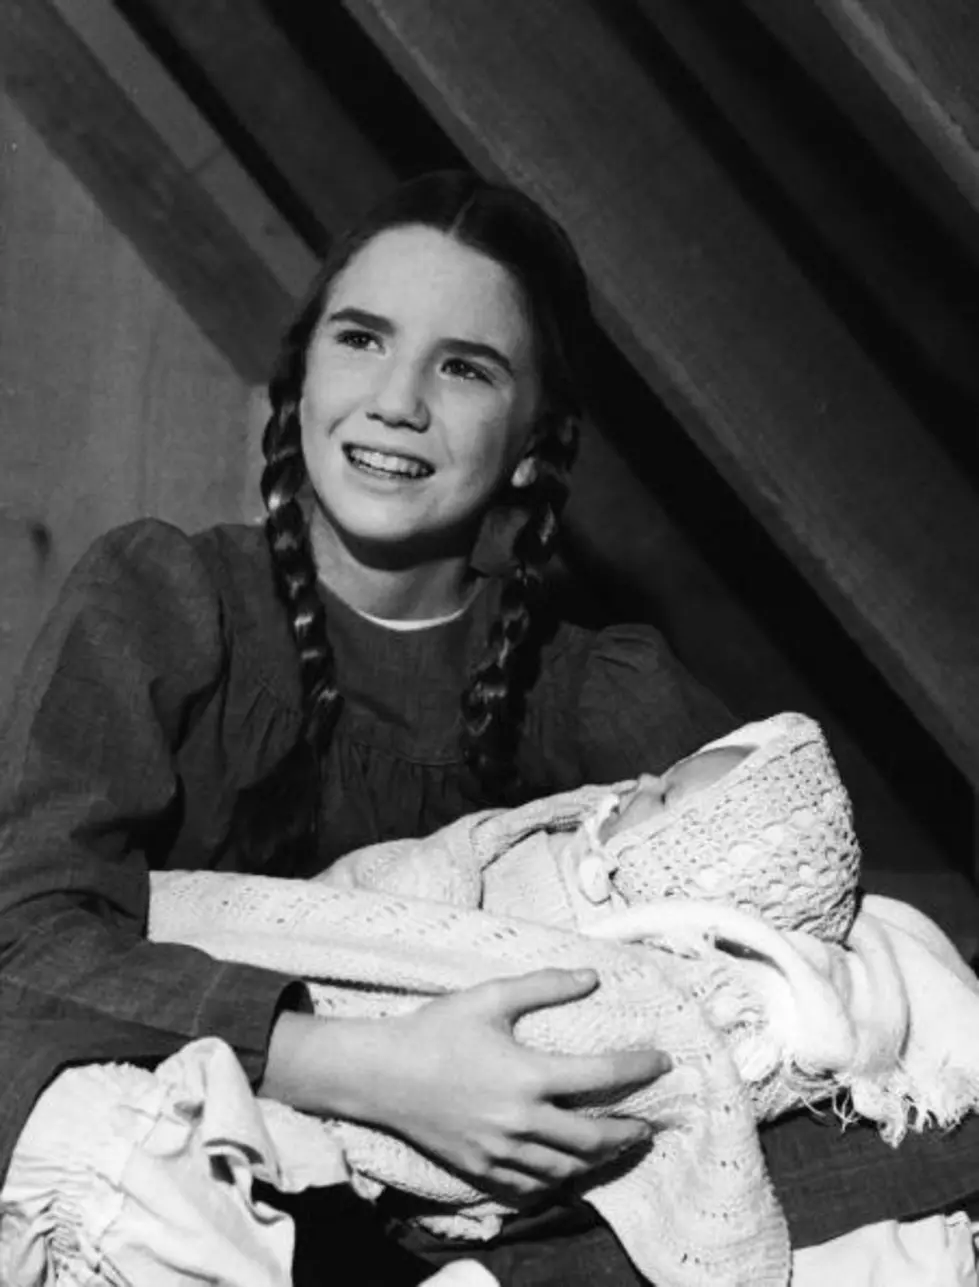 Watch for Another Laura Ingalls Wilder Book to Hit the Shelves